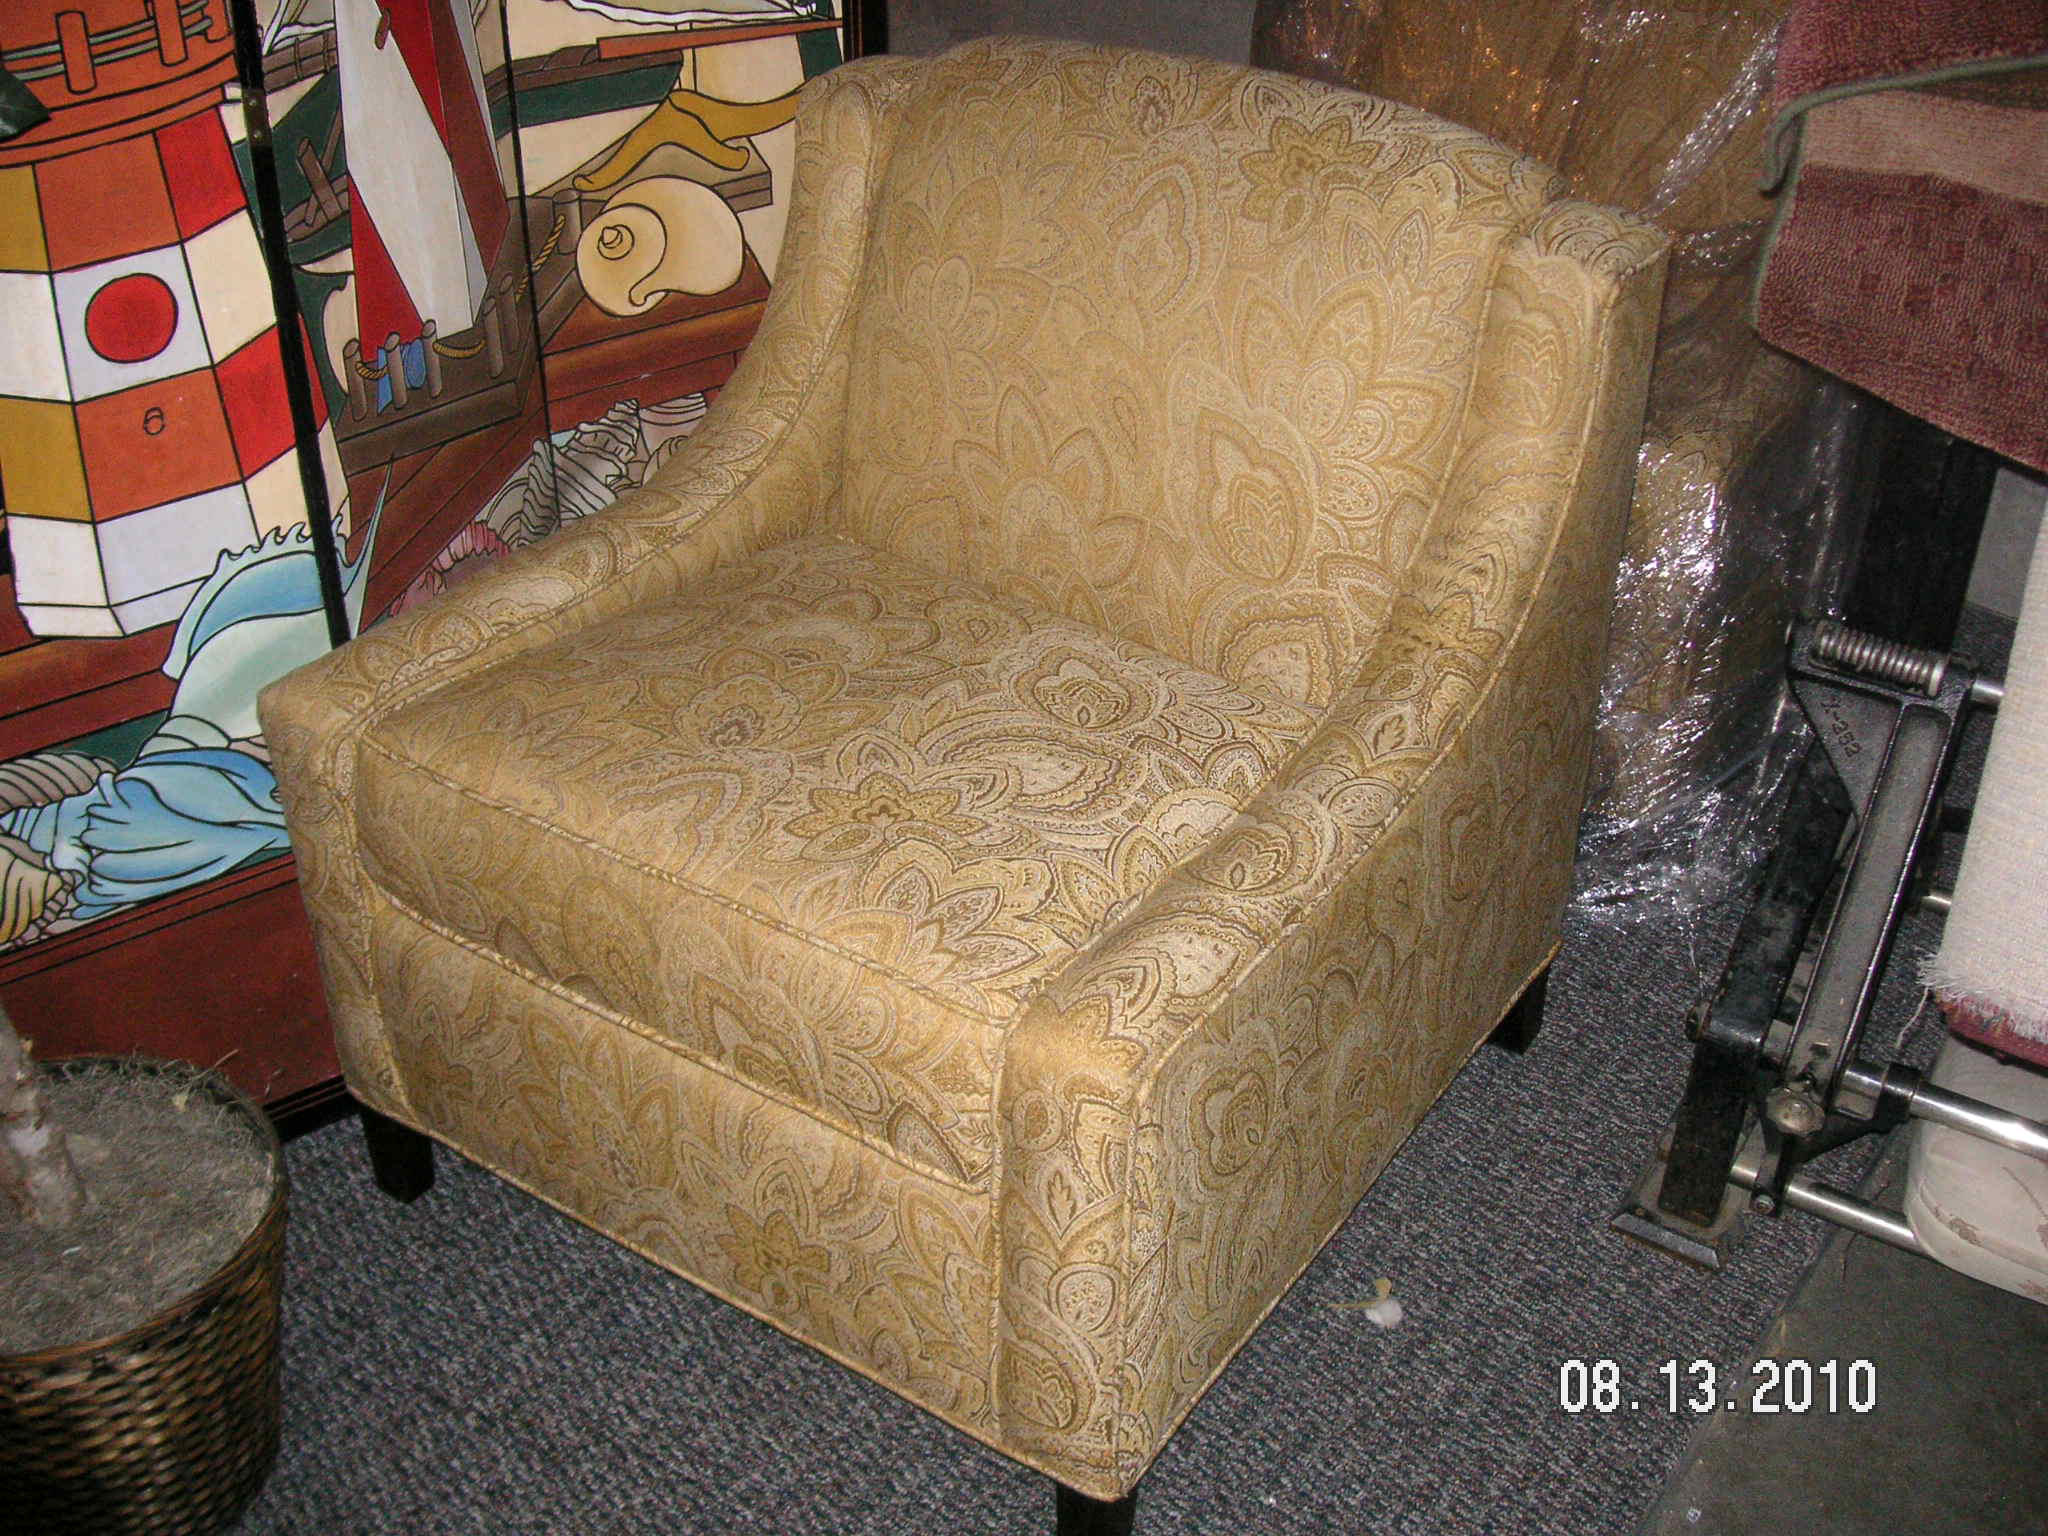 Upholstered Chair